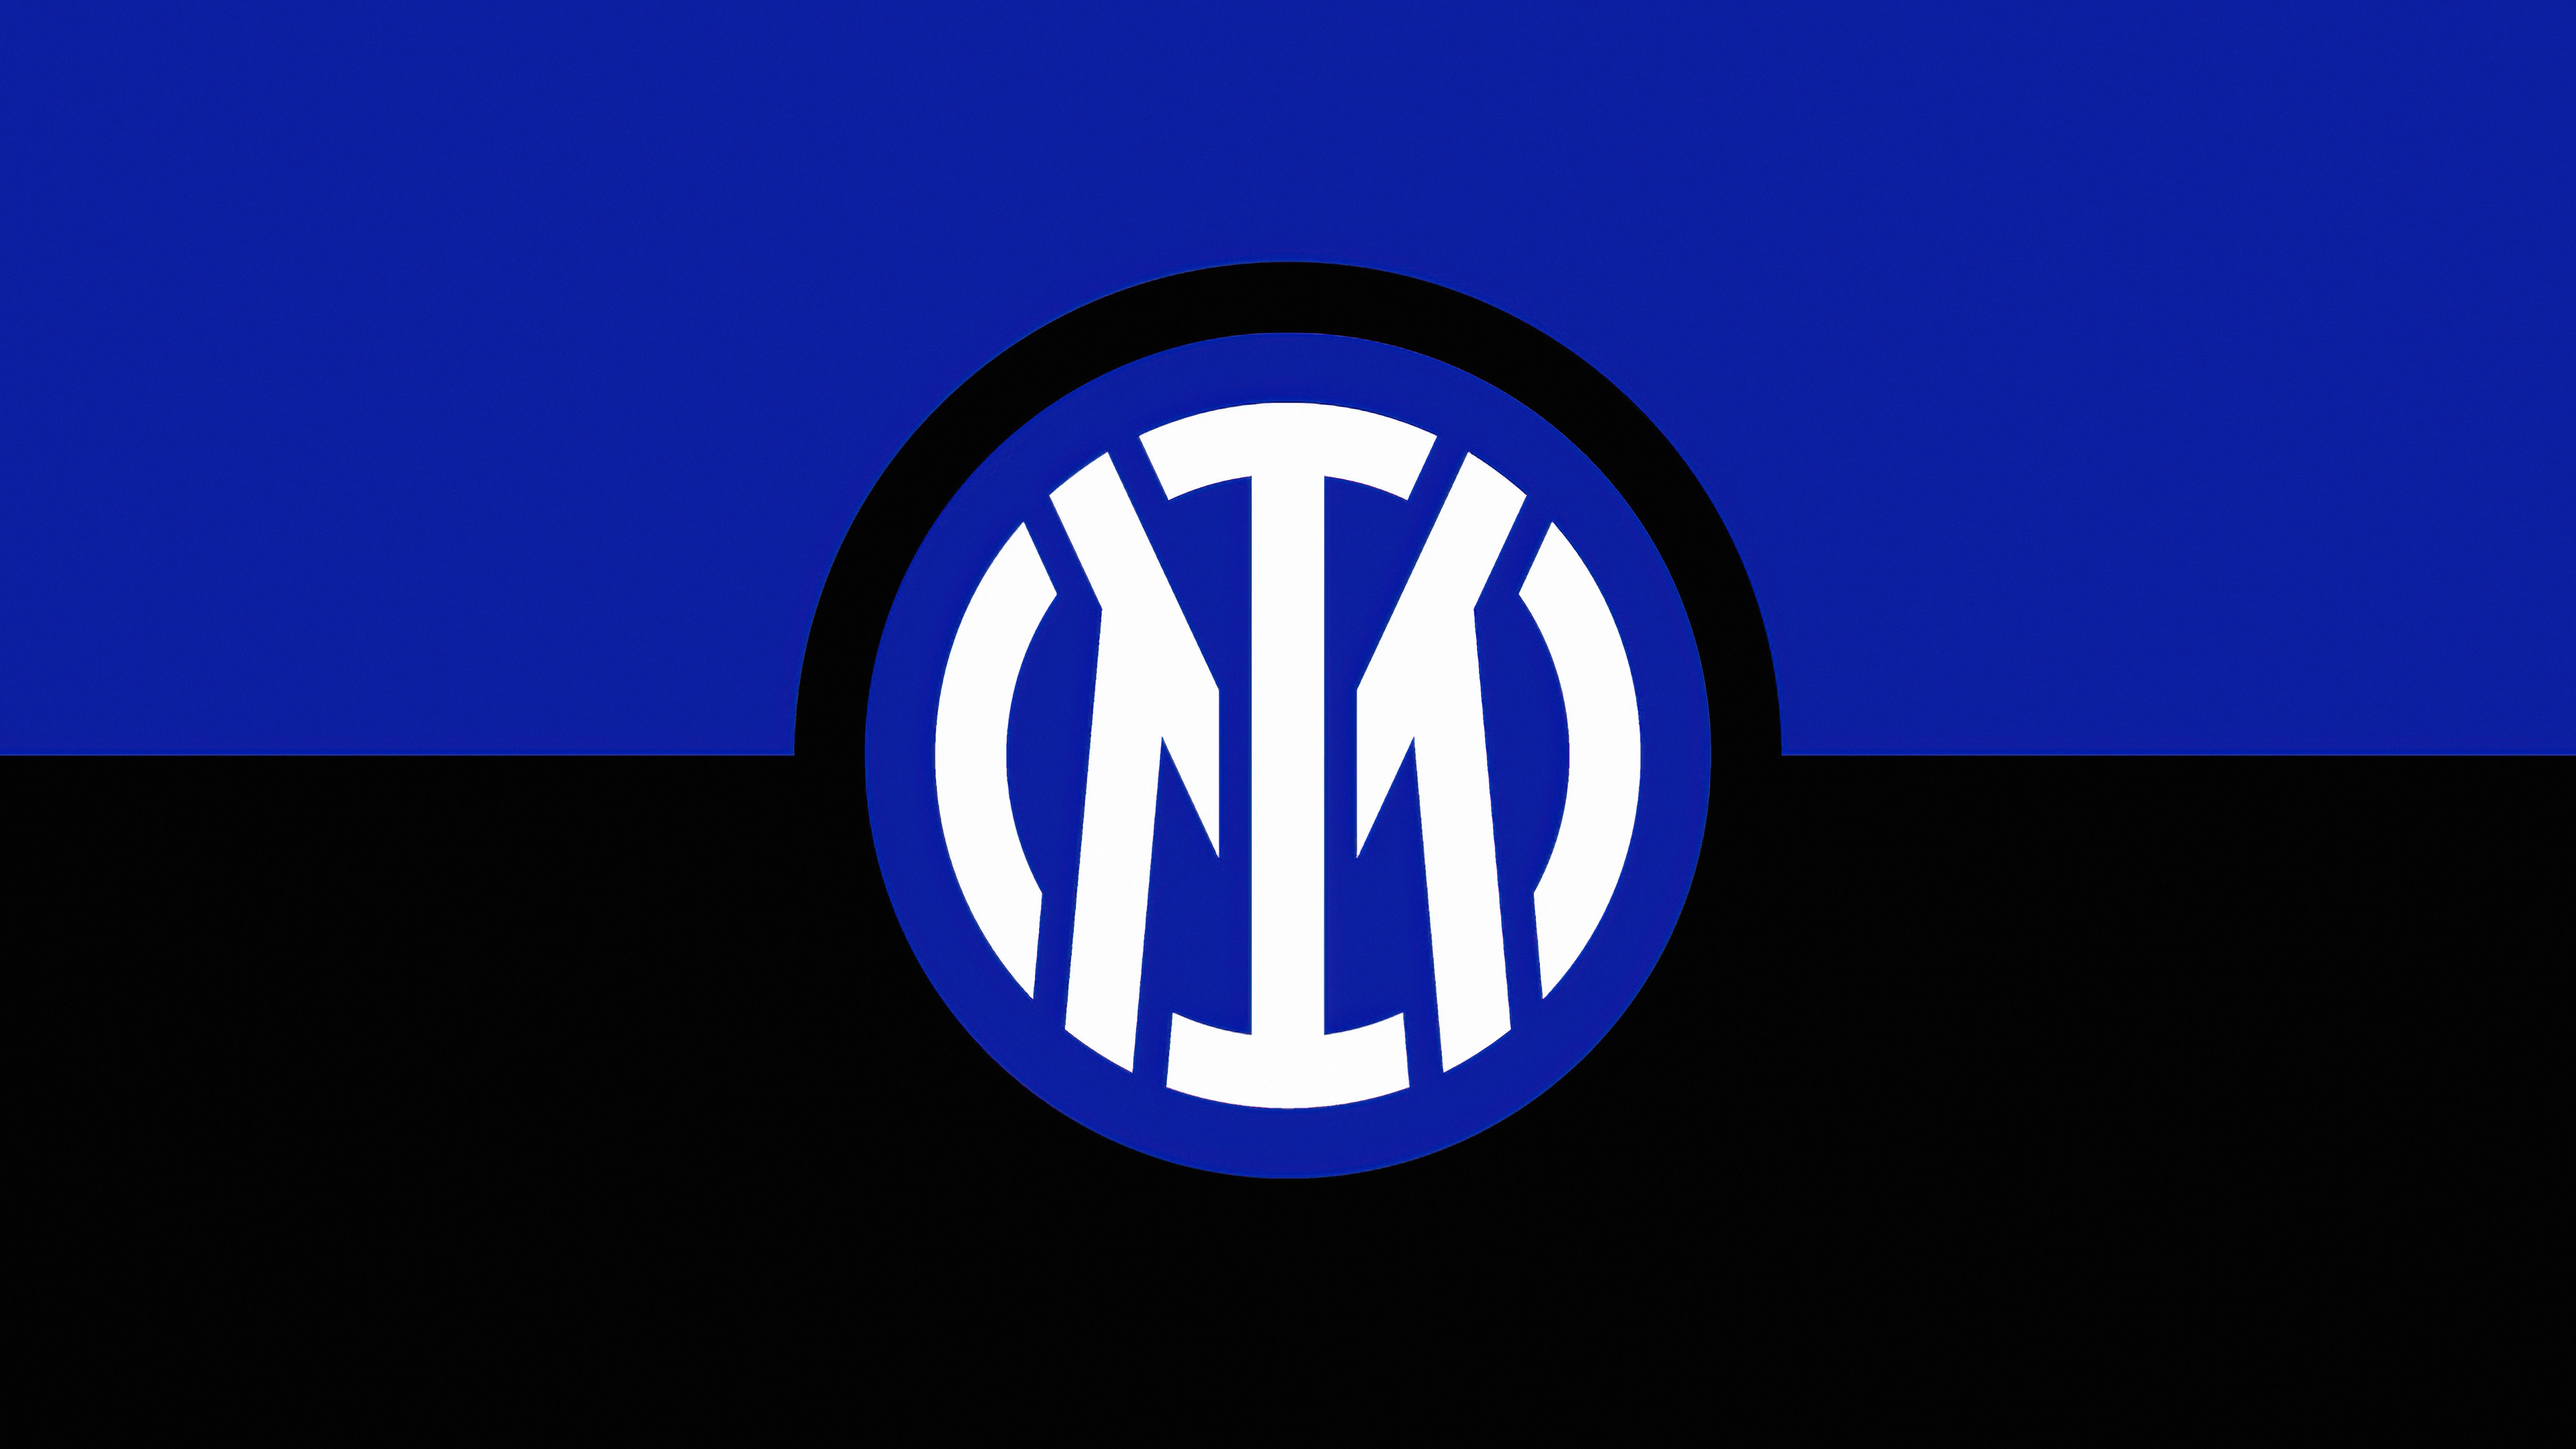 Inter Milan Logo Minimal 8k, HD Sports, 4k Wallpapers, Image, Backgrounds, Photos and Pictures